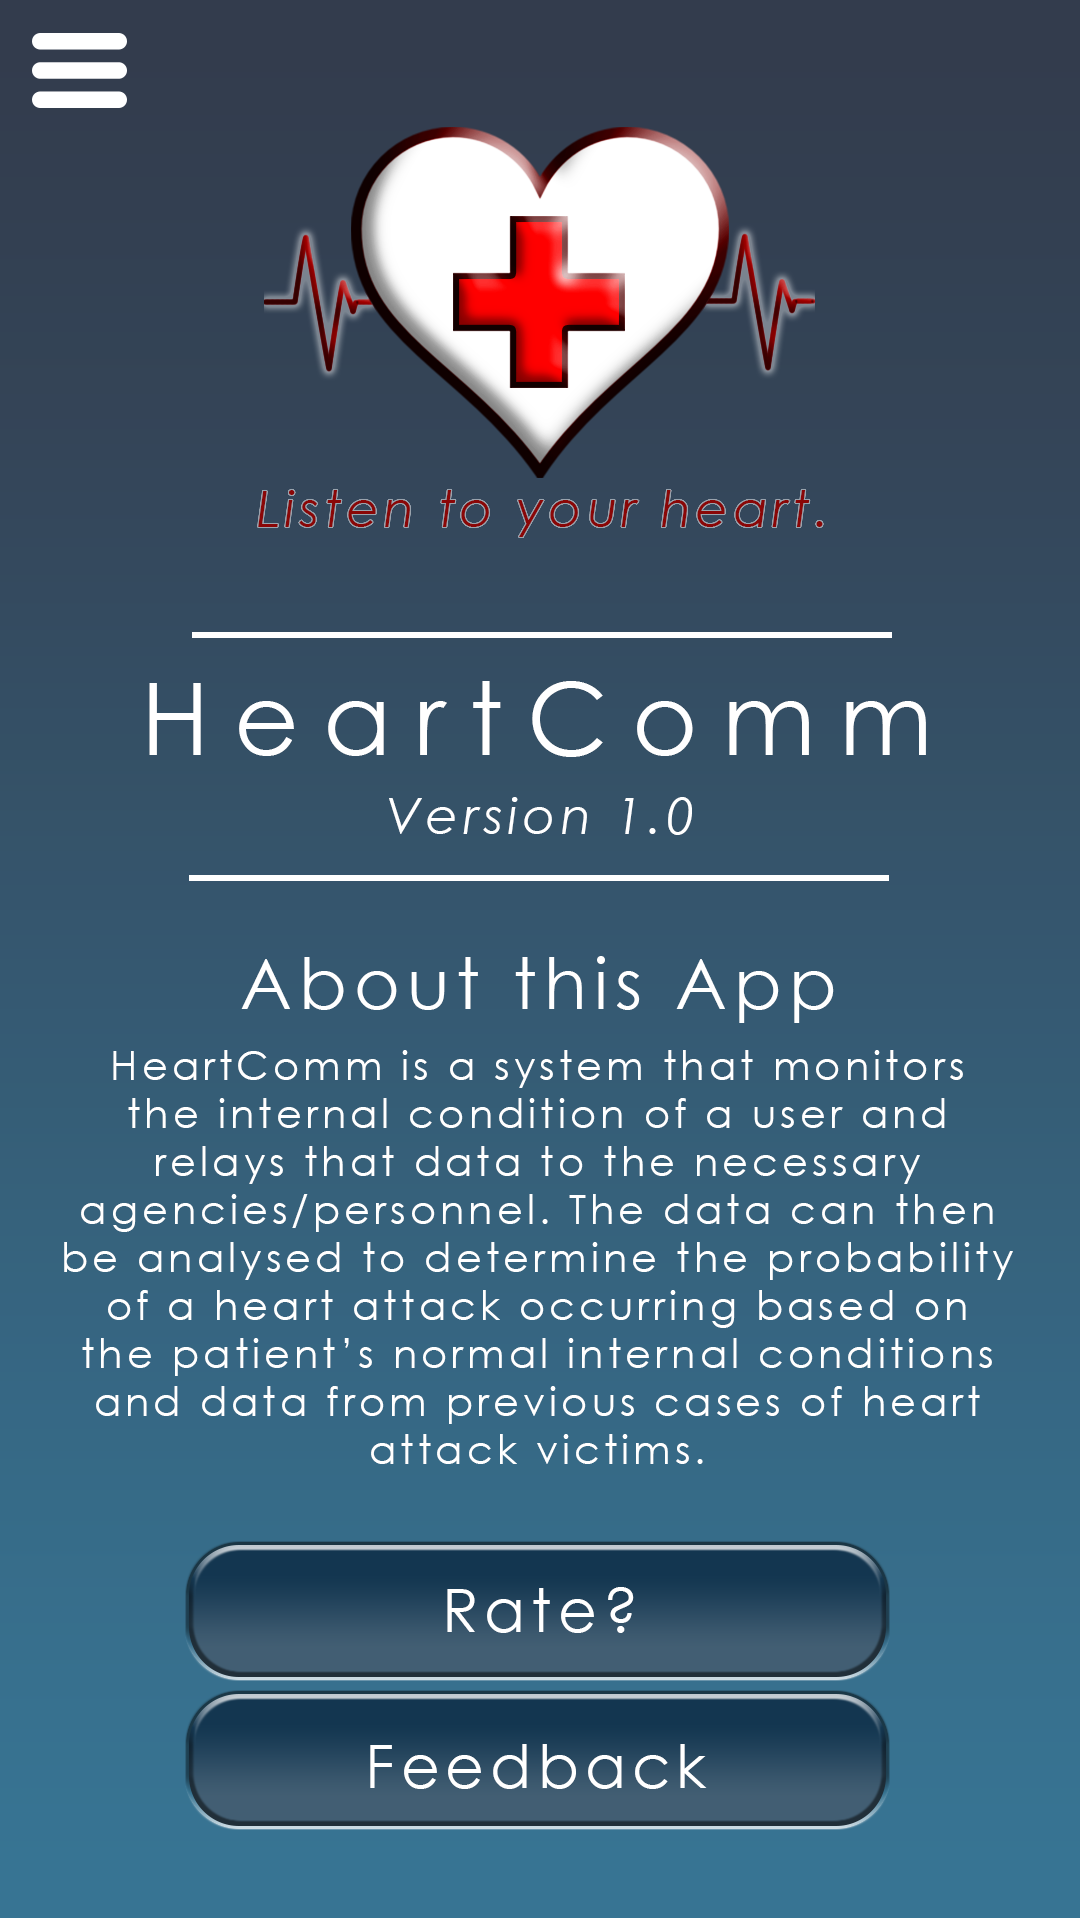 HeartComm App About Page